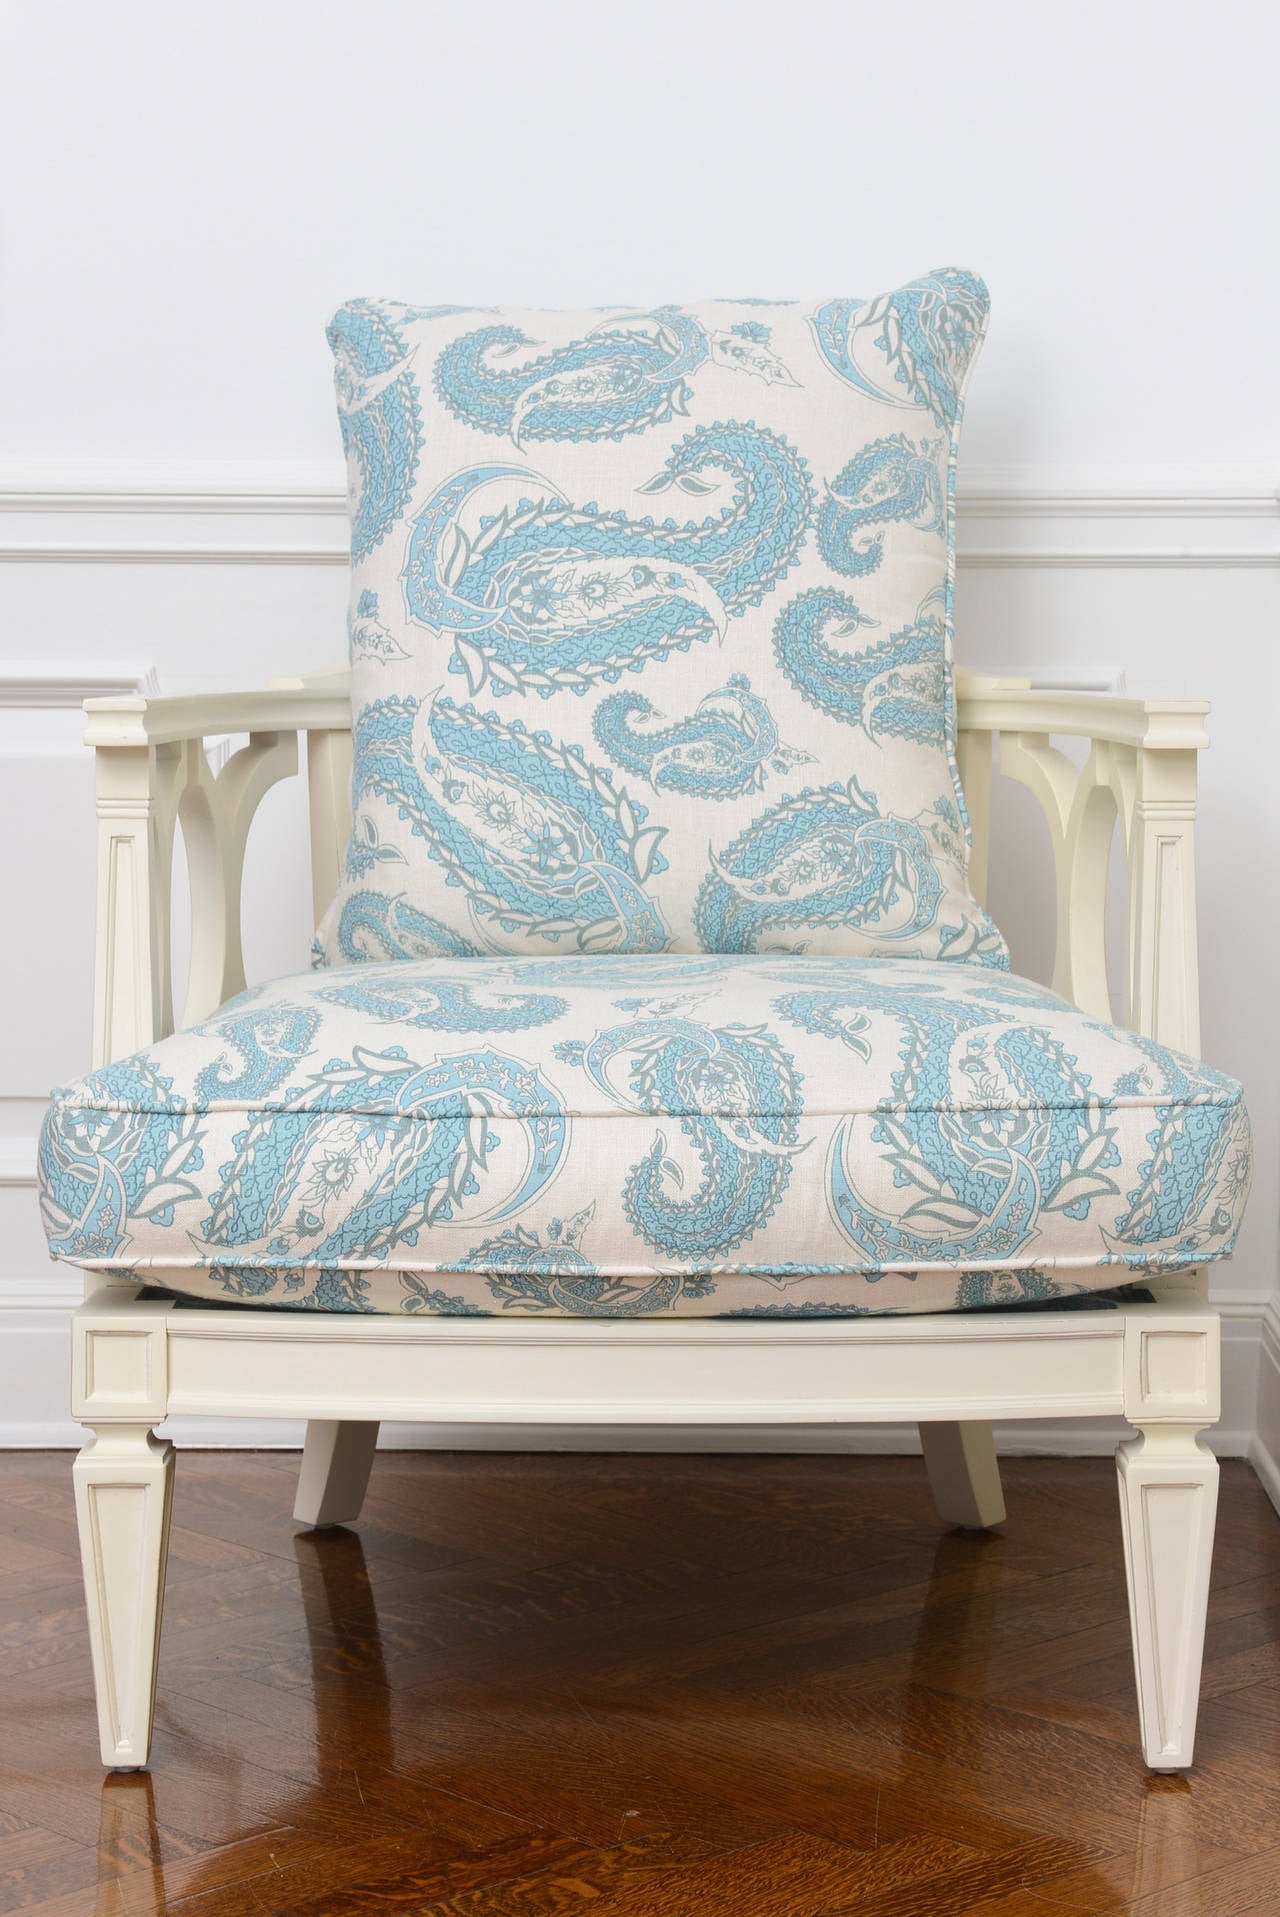 Glamorous Hollywood Regency style armchair.  With blue paisley seat and back cushion.